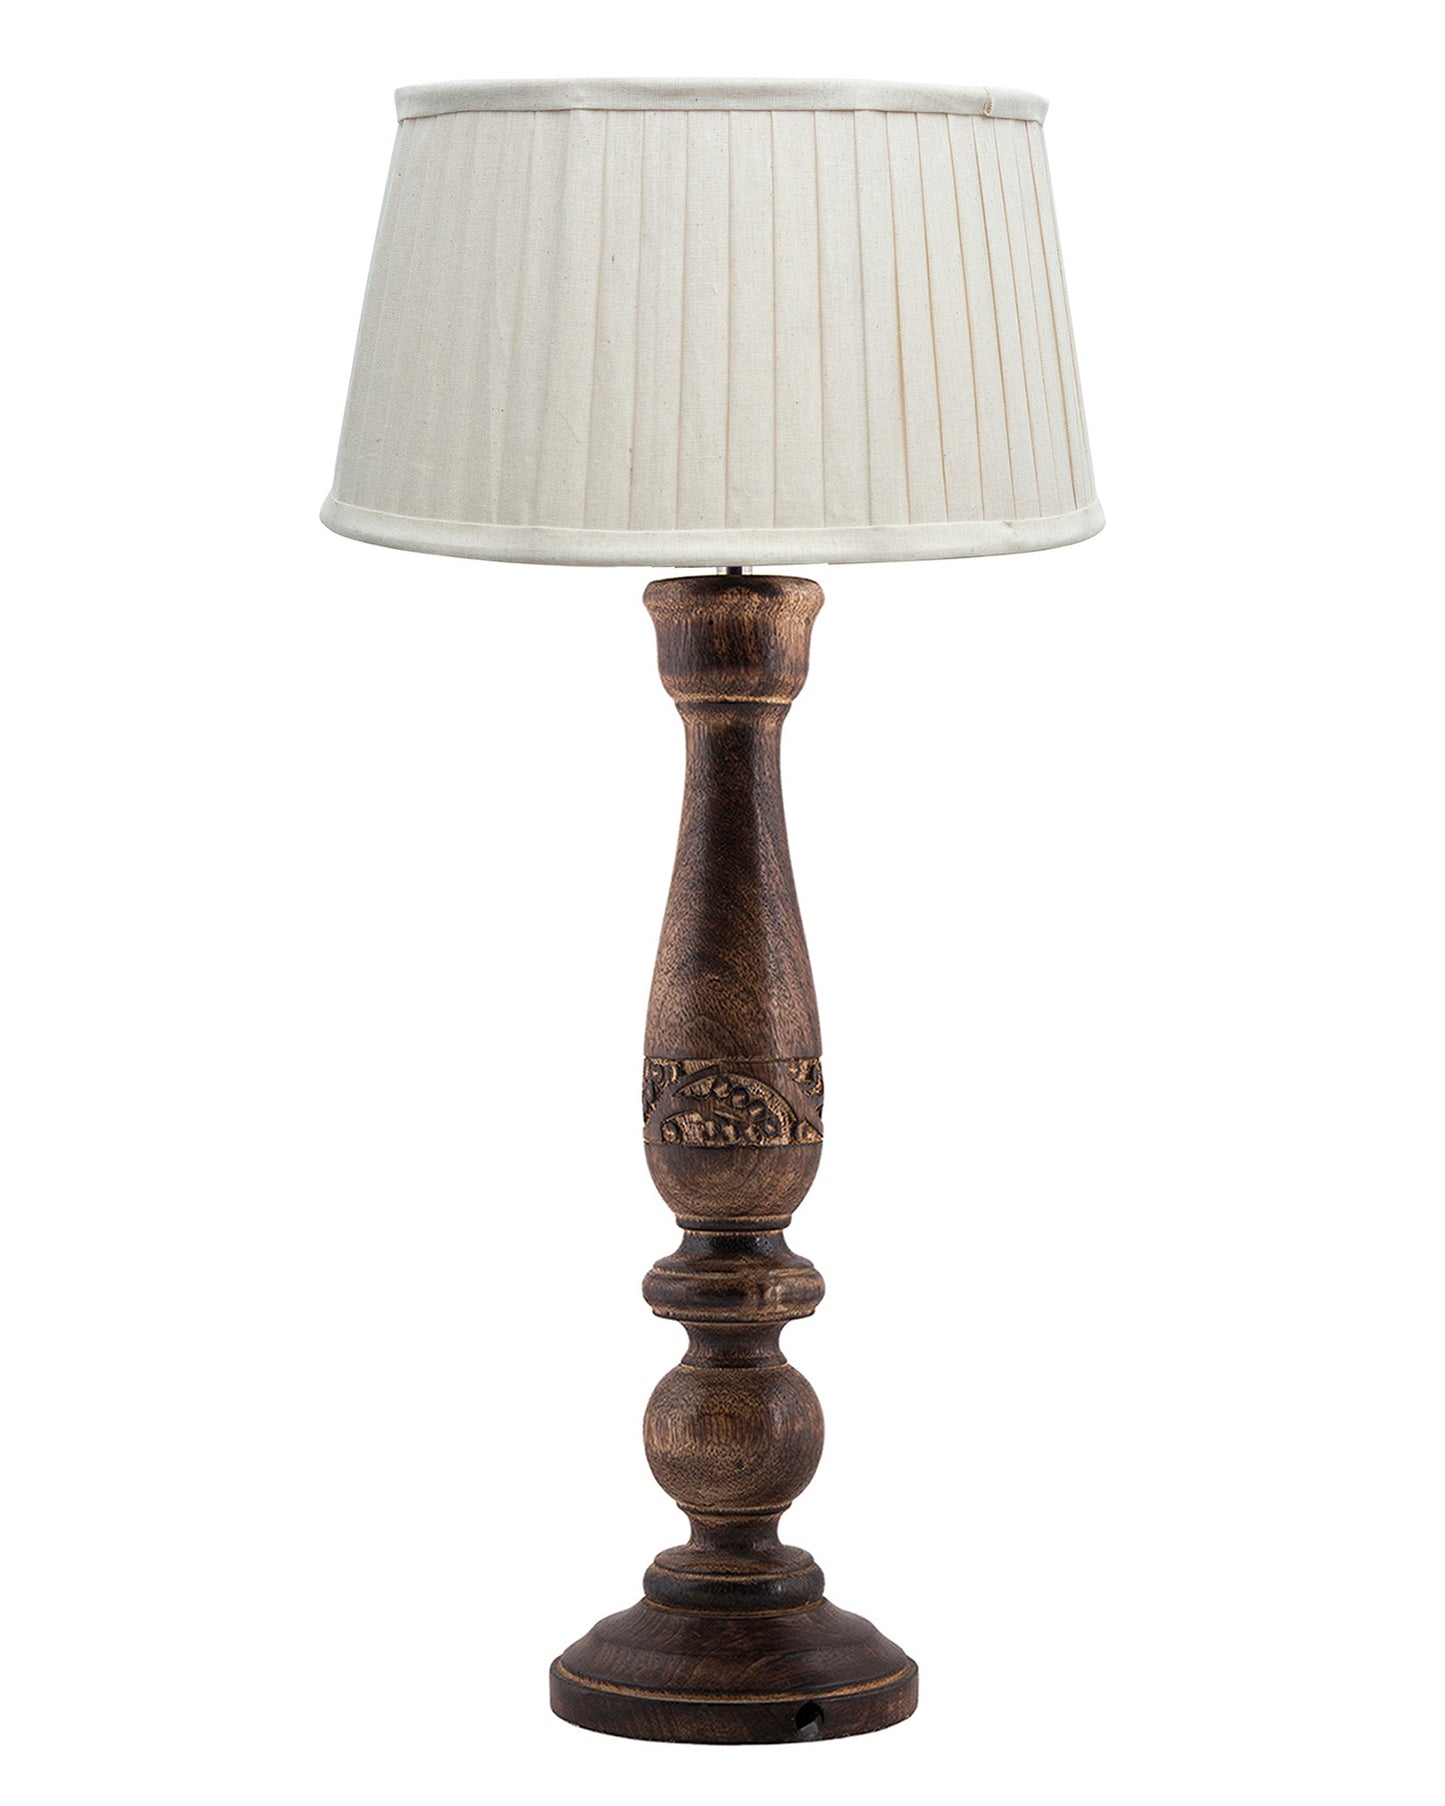 Mable Antique Wooden Table Lamp with Empire Pleated Shade